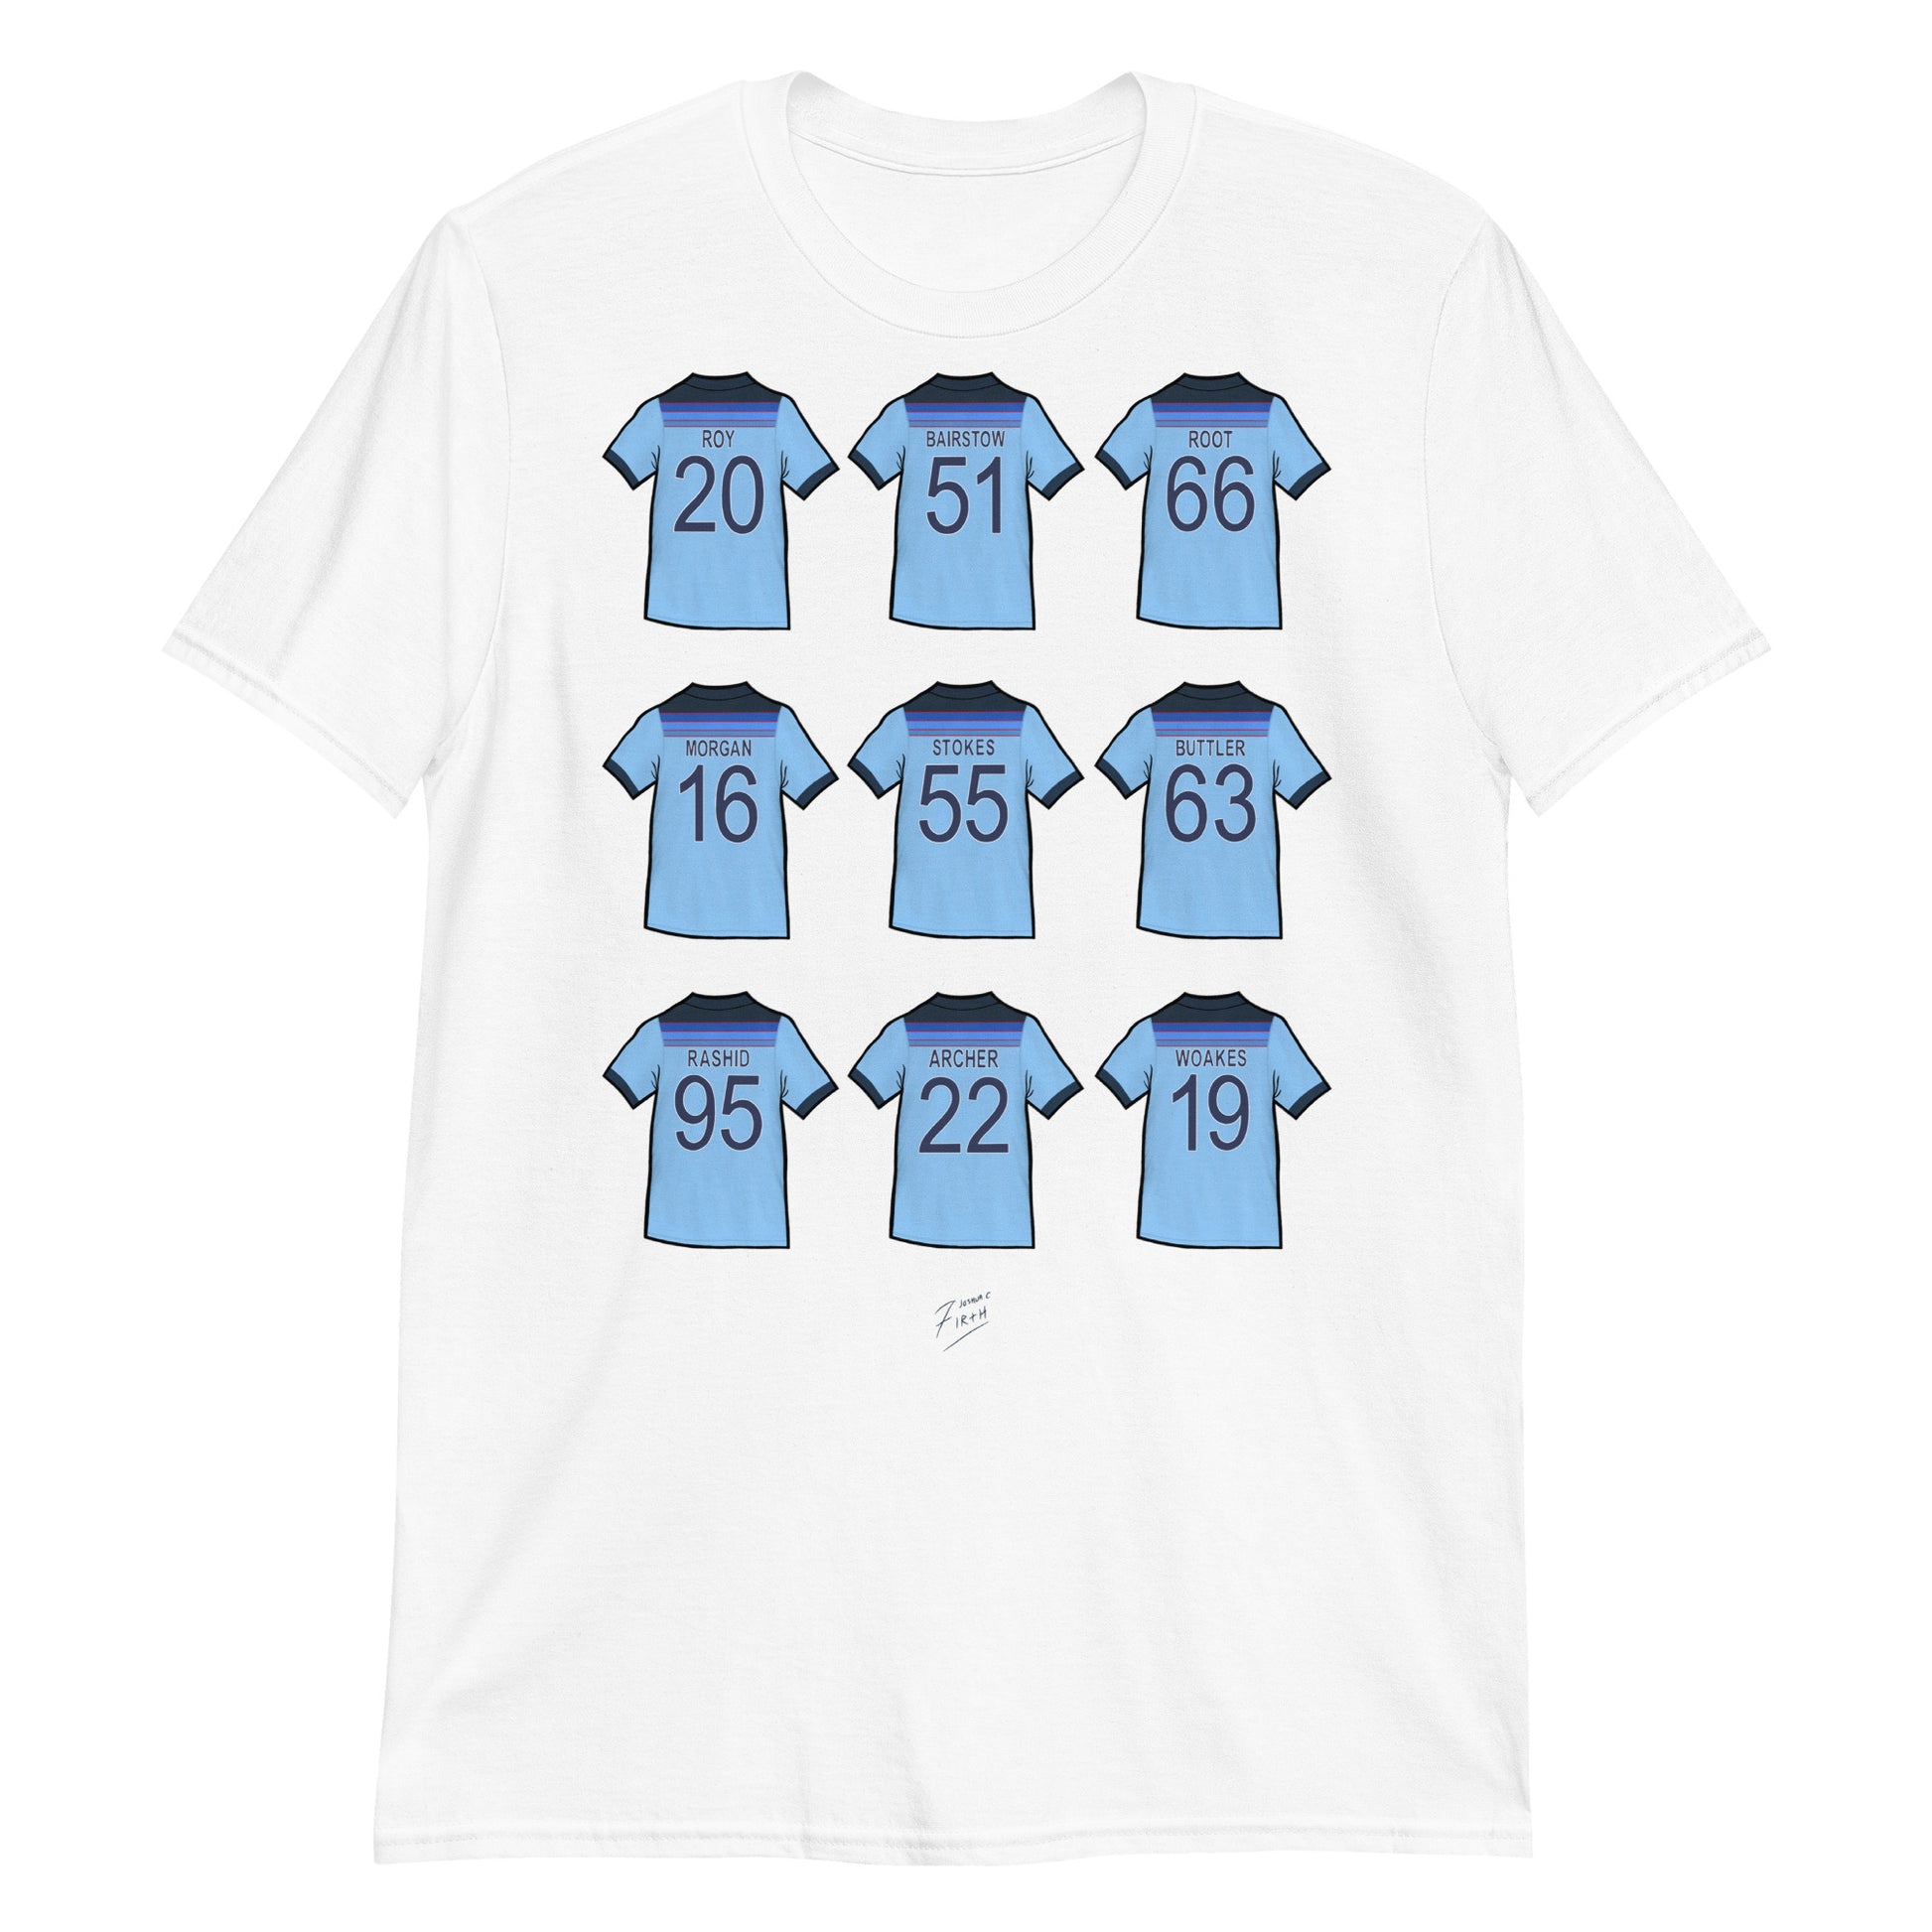 White England Cricket t-shirt celebrating the World Cup in 2019